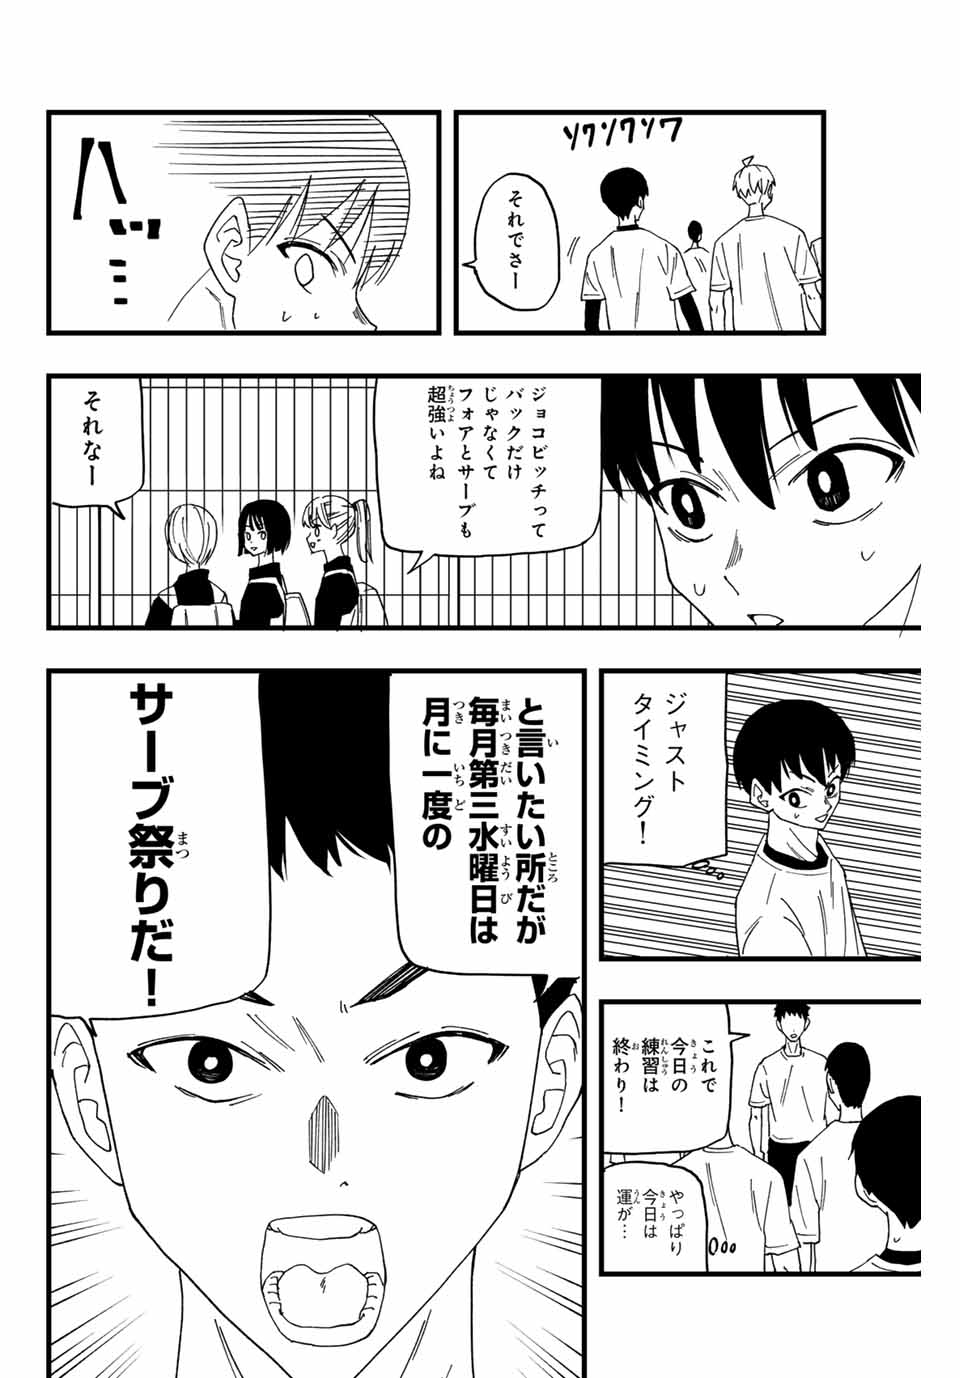 LoVE GAME 第2話 - Page 24